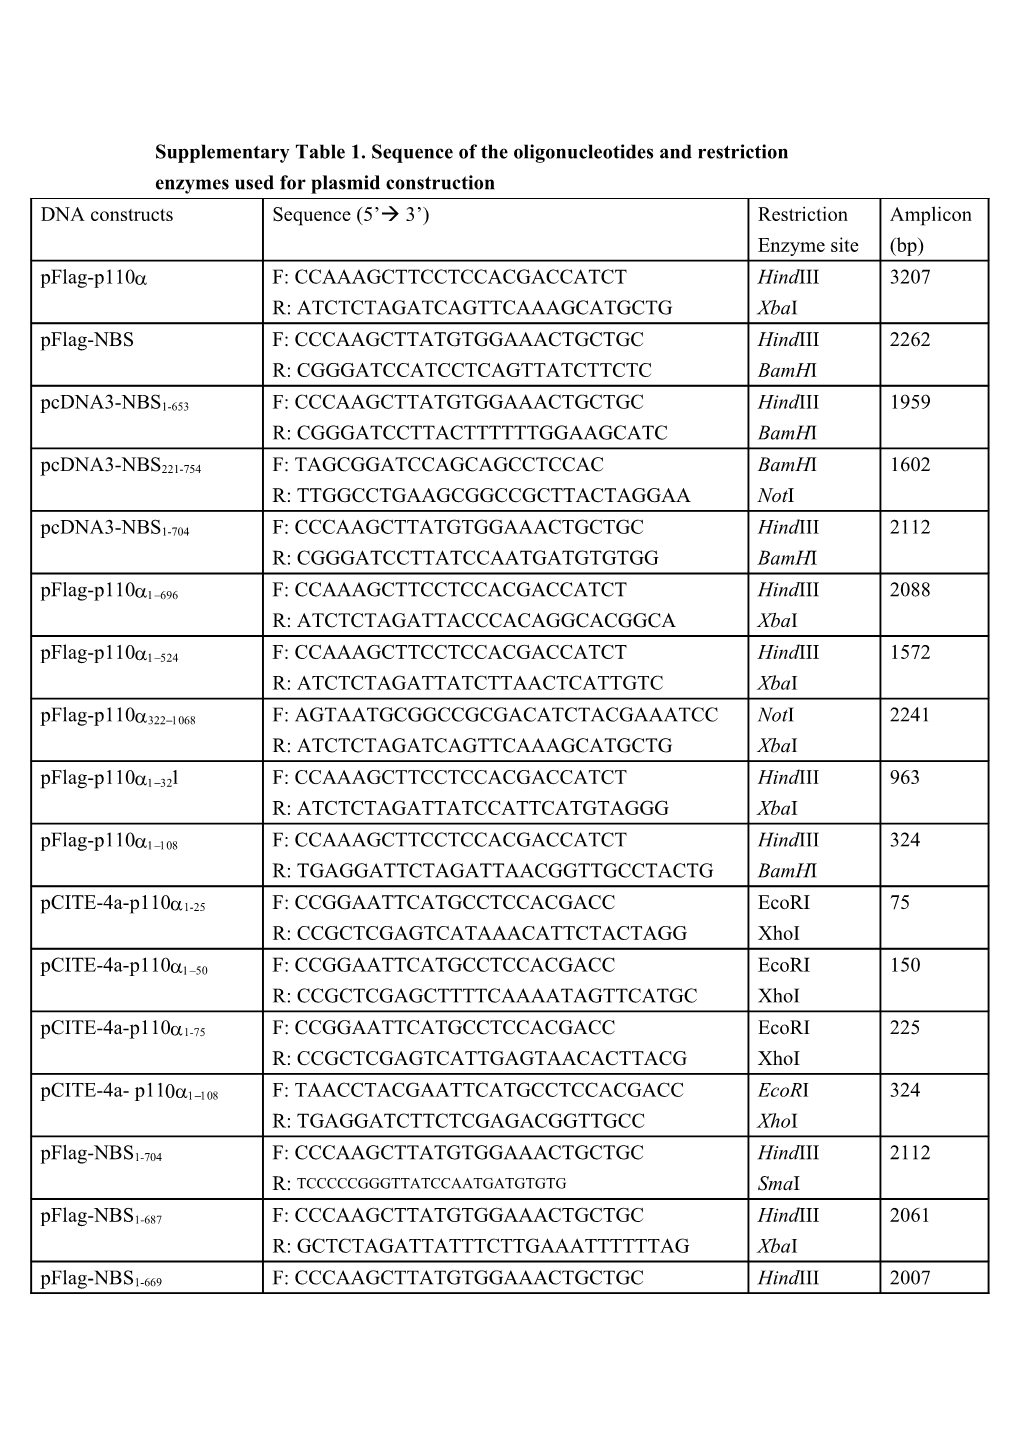 Supplementary Table 1. Sequence of the Oligonucleotides and Restriction Enzymes Used For